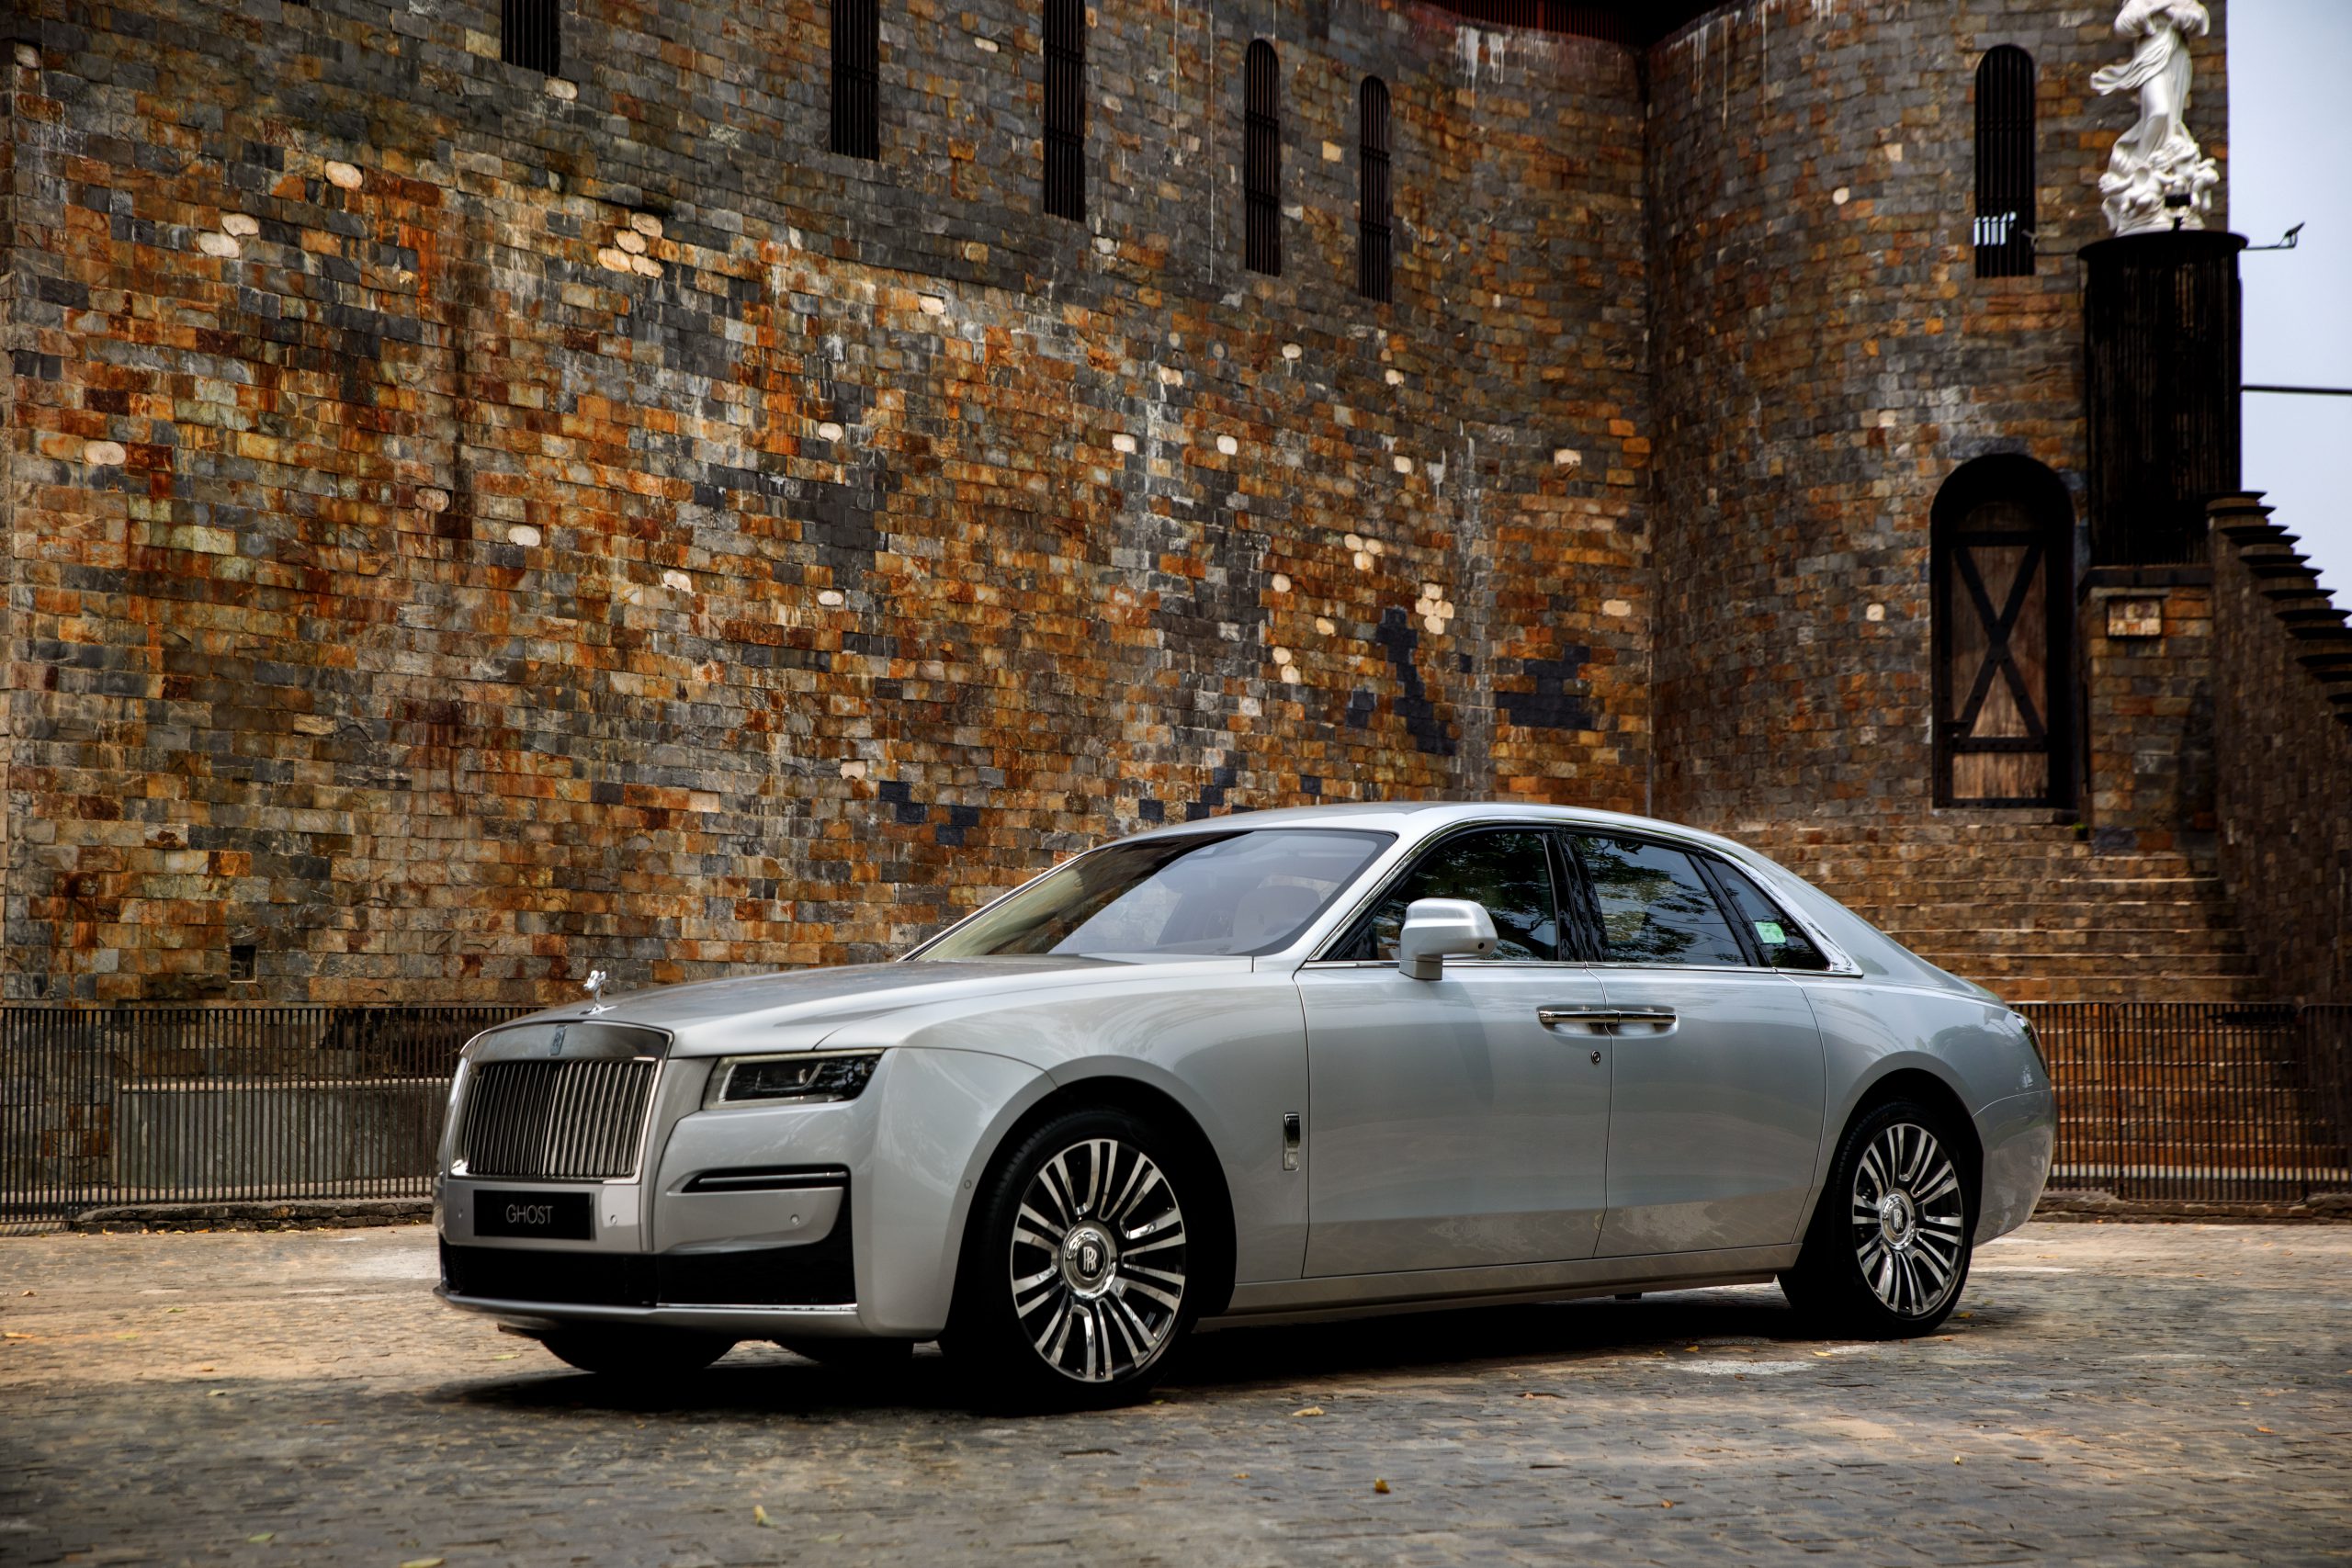 Used 2020 RollsRoyce Ghost For Sale Sold  Bentley Washington DC Stock  20N004691A